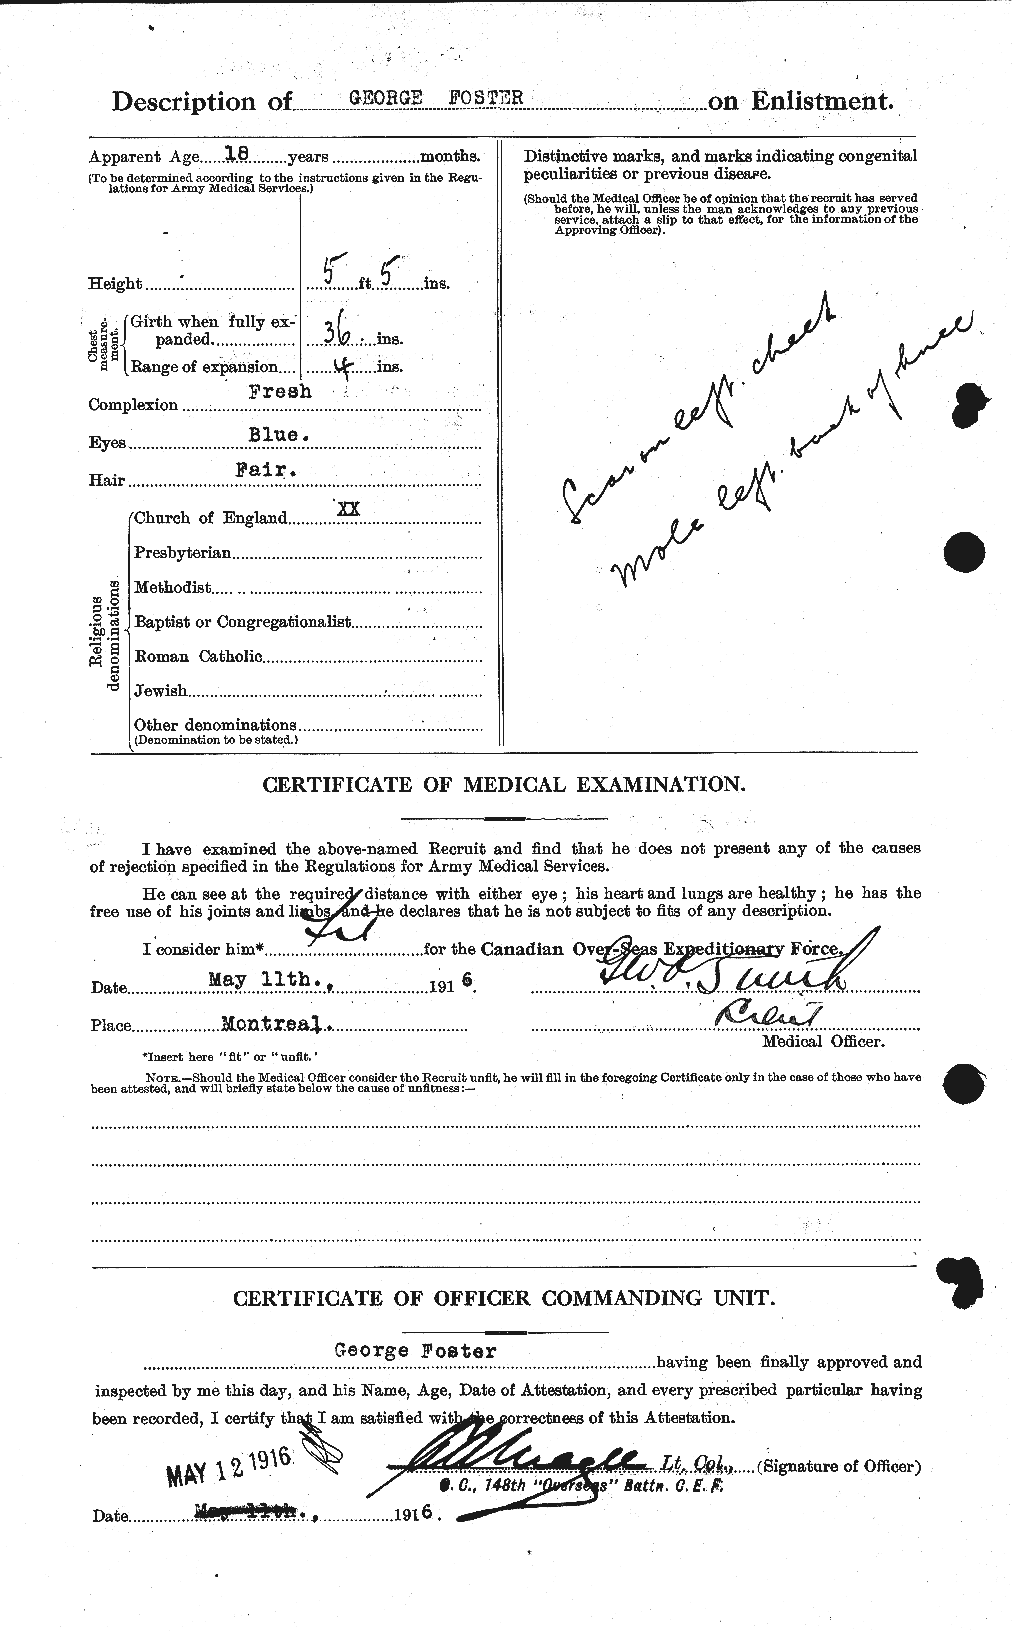 Personnel Records of the First World War - CEF 330662b